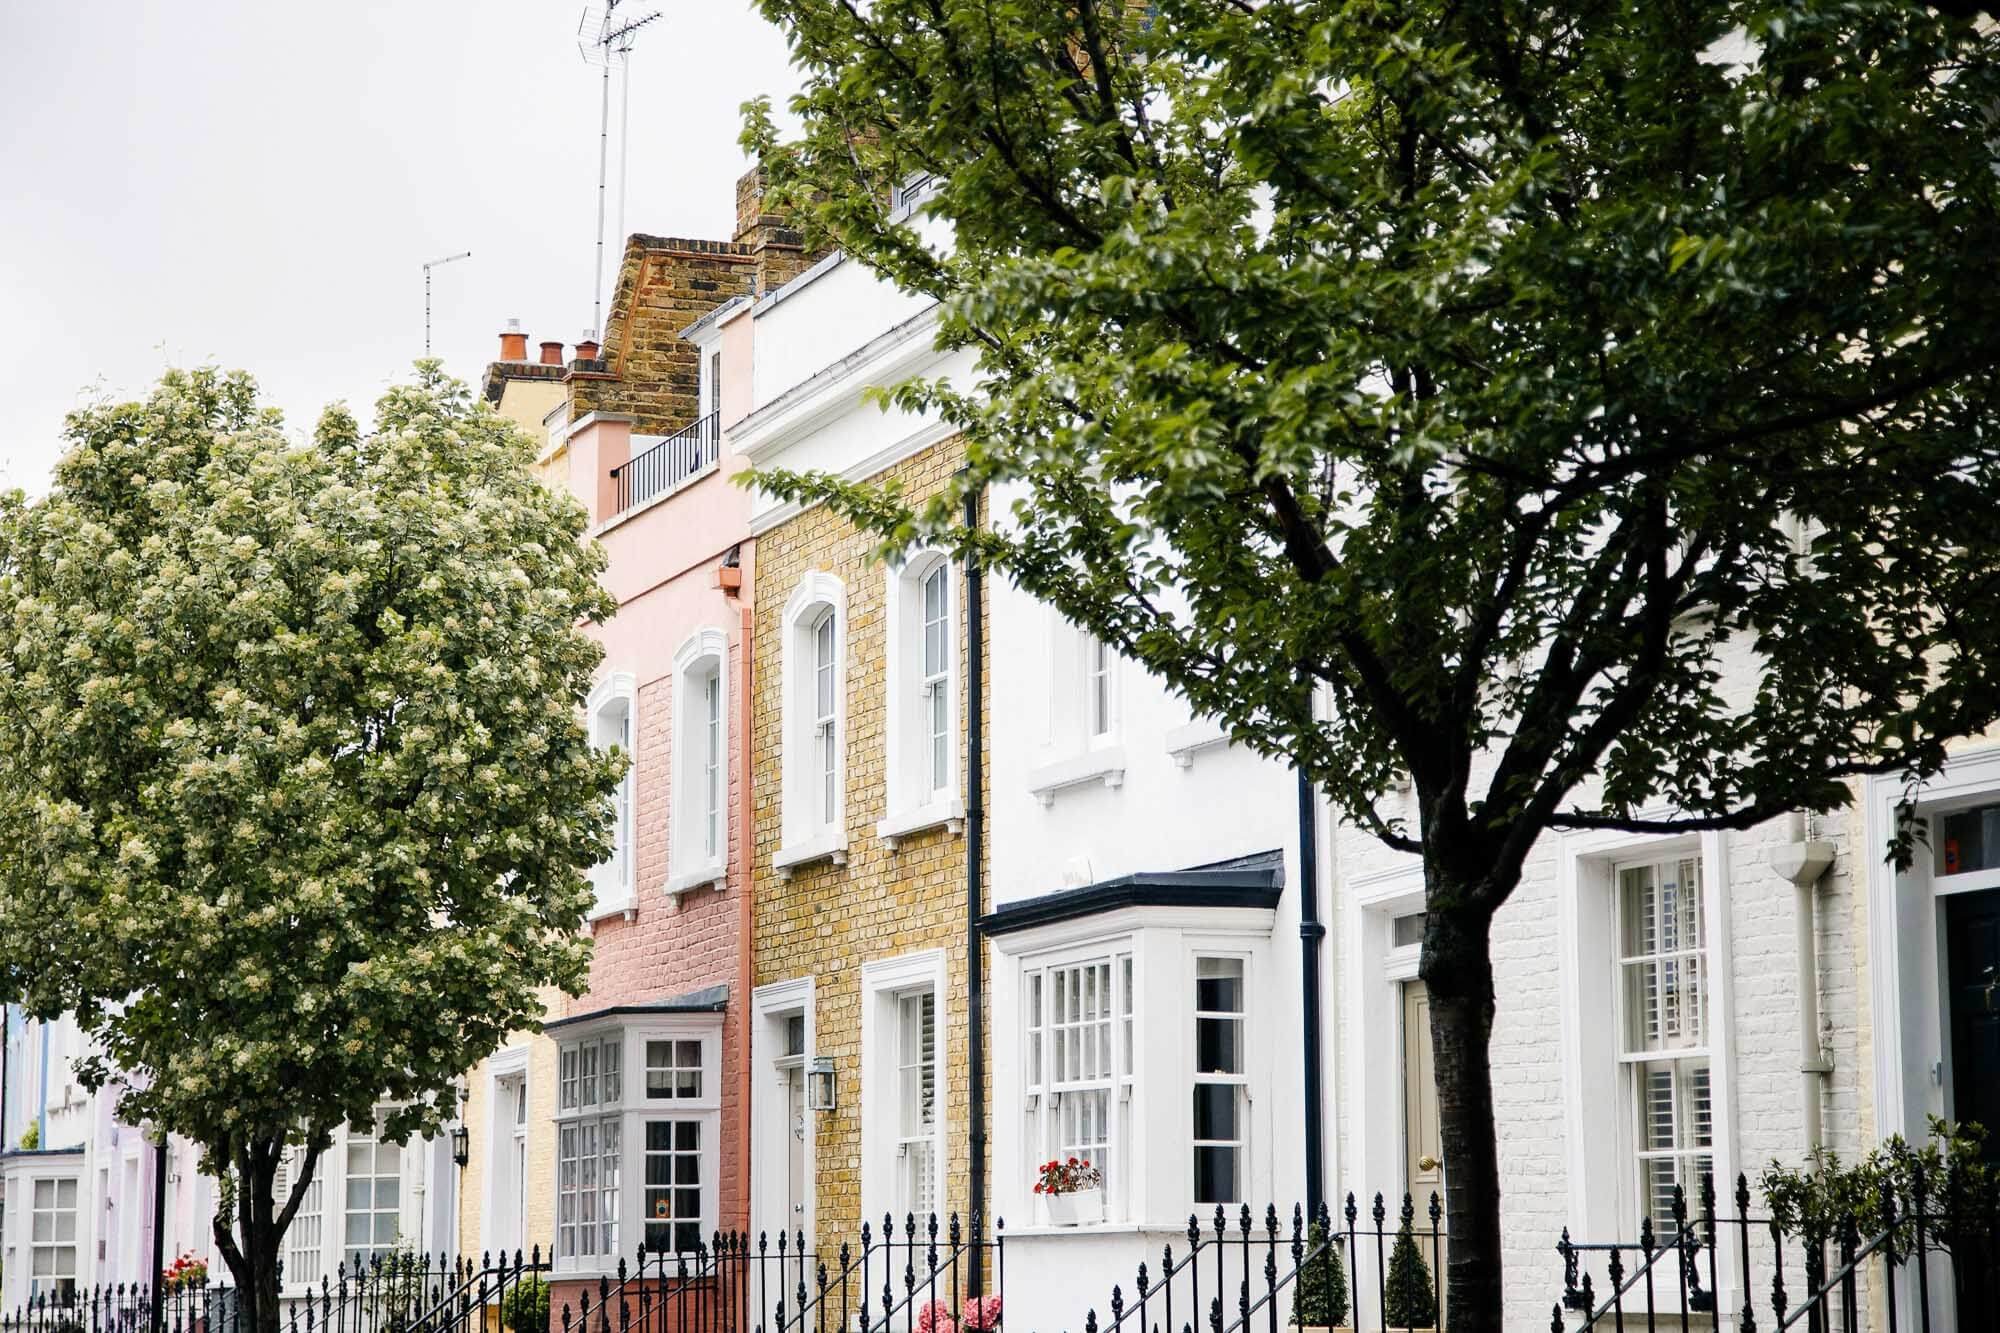 One of the best places to go in London is colorful Notting Hill